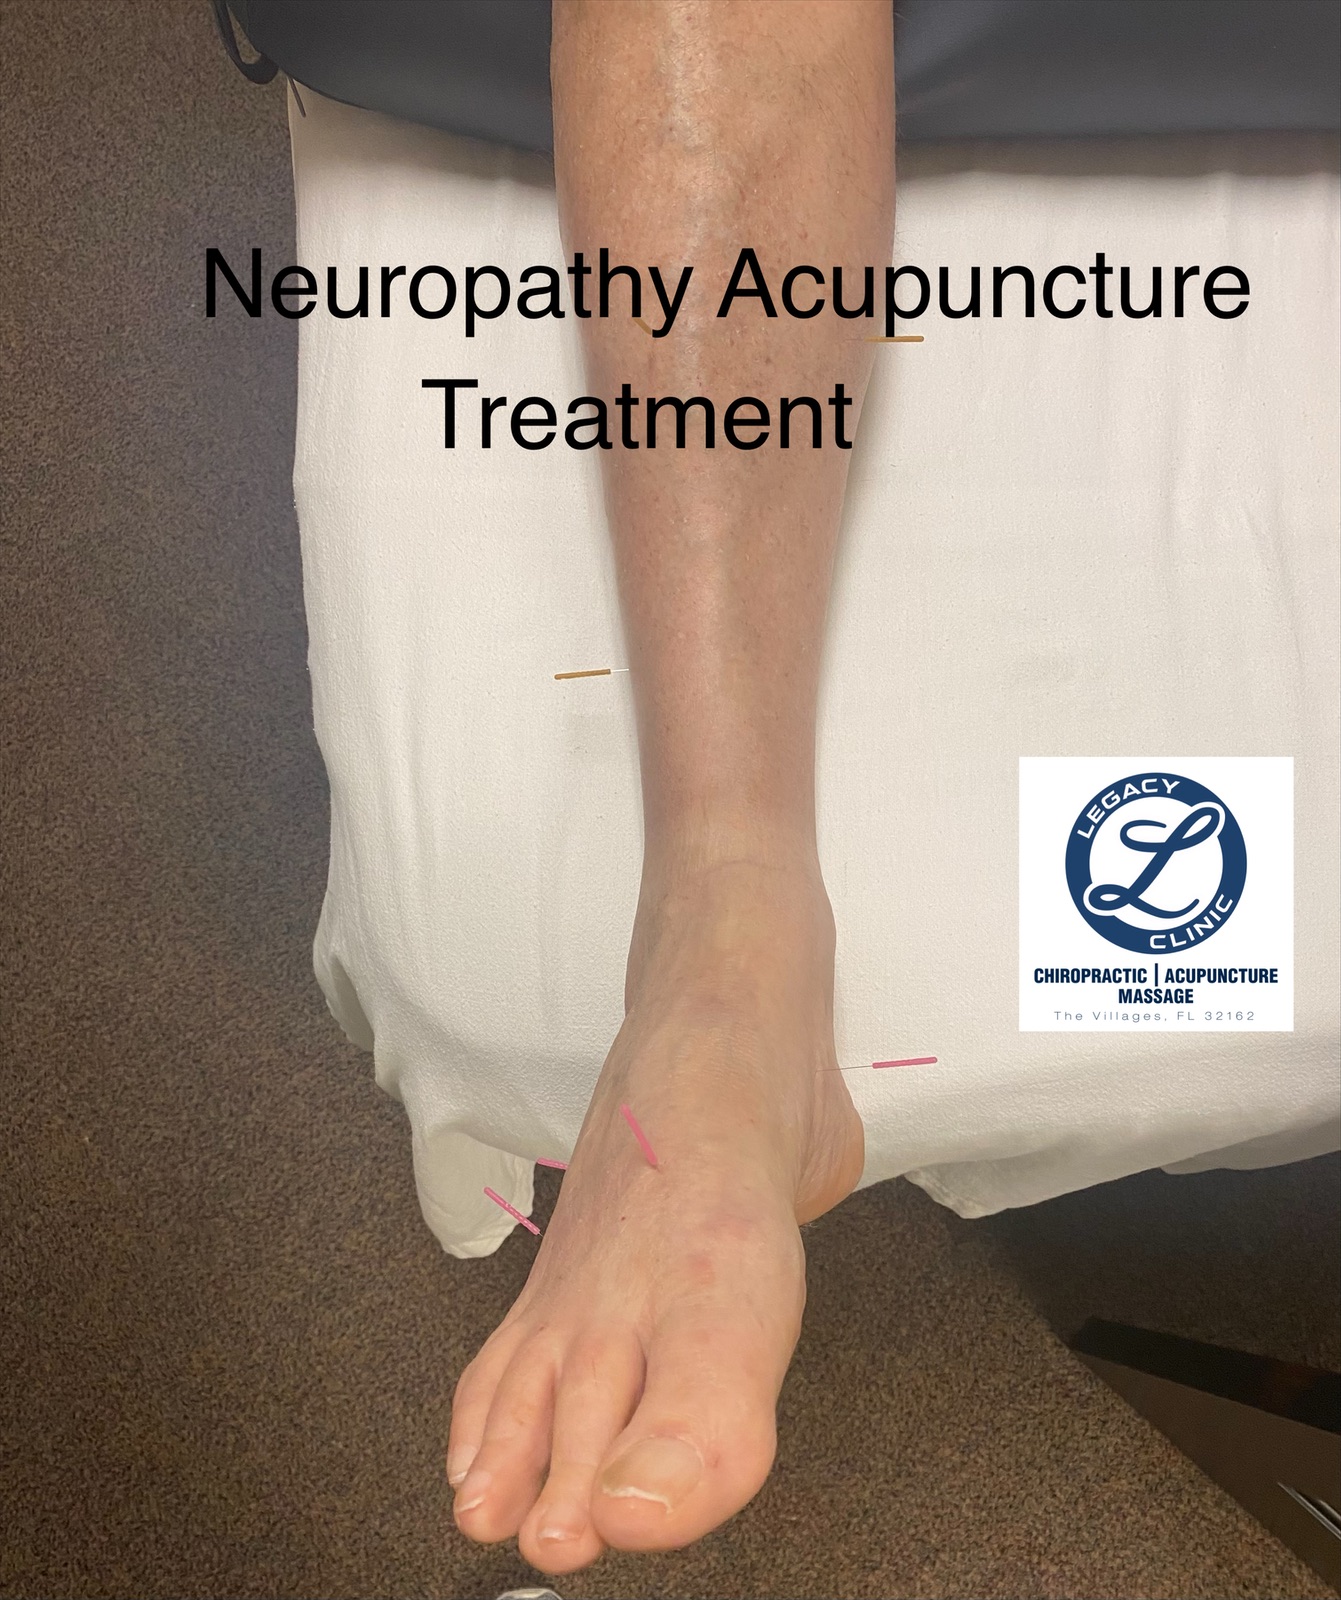 Acupuncture neuropathy